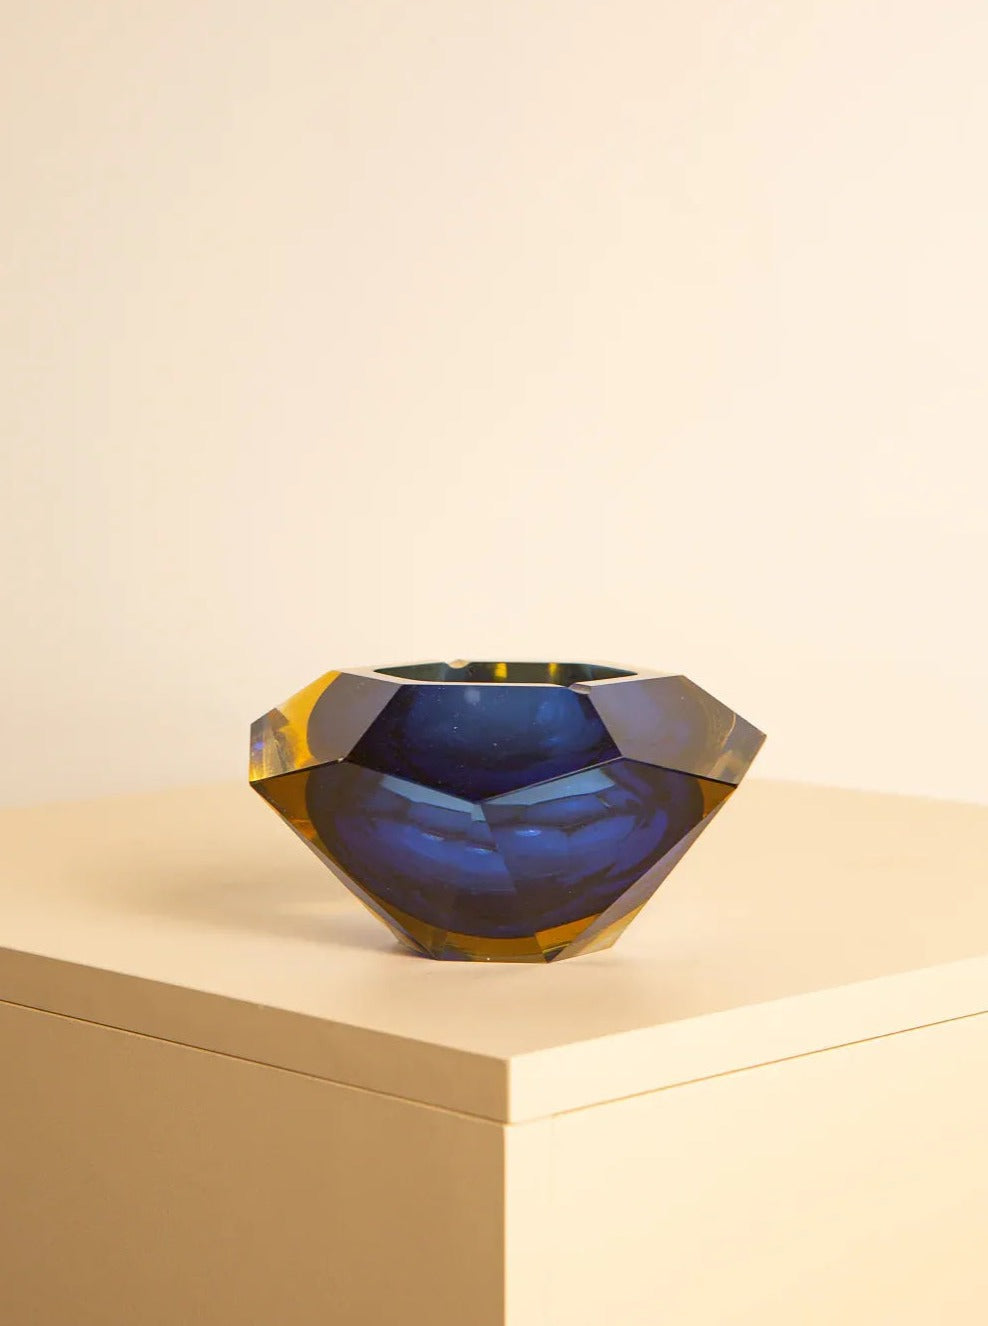 A Large vide-poches blue "Diamond" by Flavio Poli 60's from Treaptyque with a deep blue center and yellow edges, displayed on a light-colored surface against a beige background. This handcrafted piece of Italian glass art features an angular design and rich colors that create a striking visual contrast.